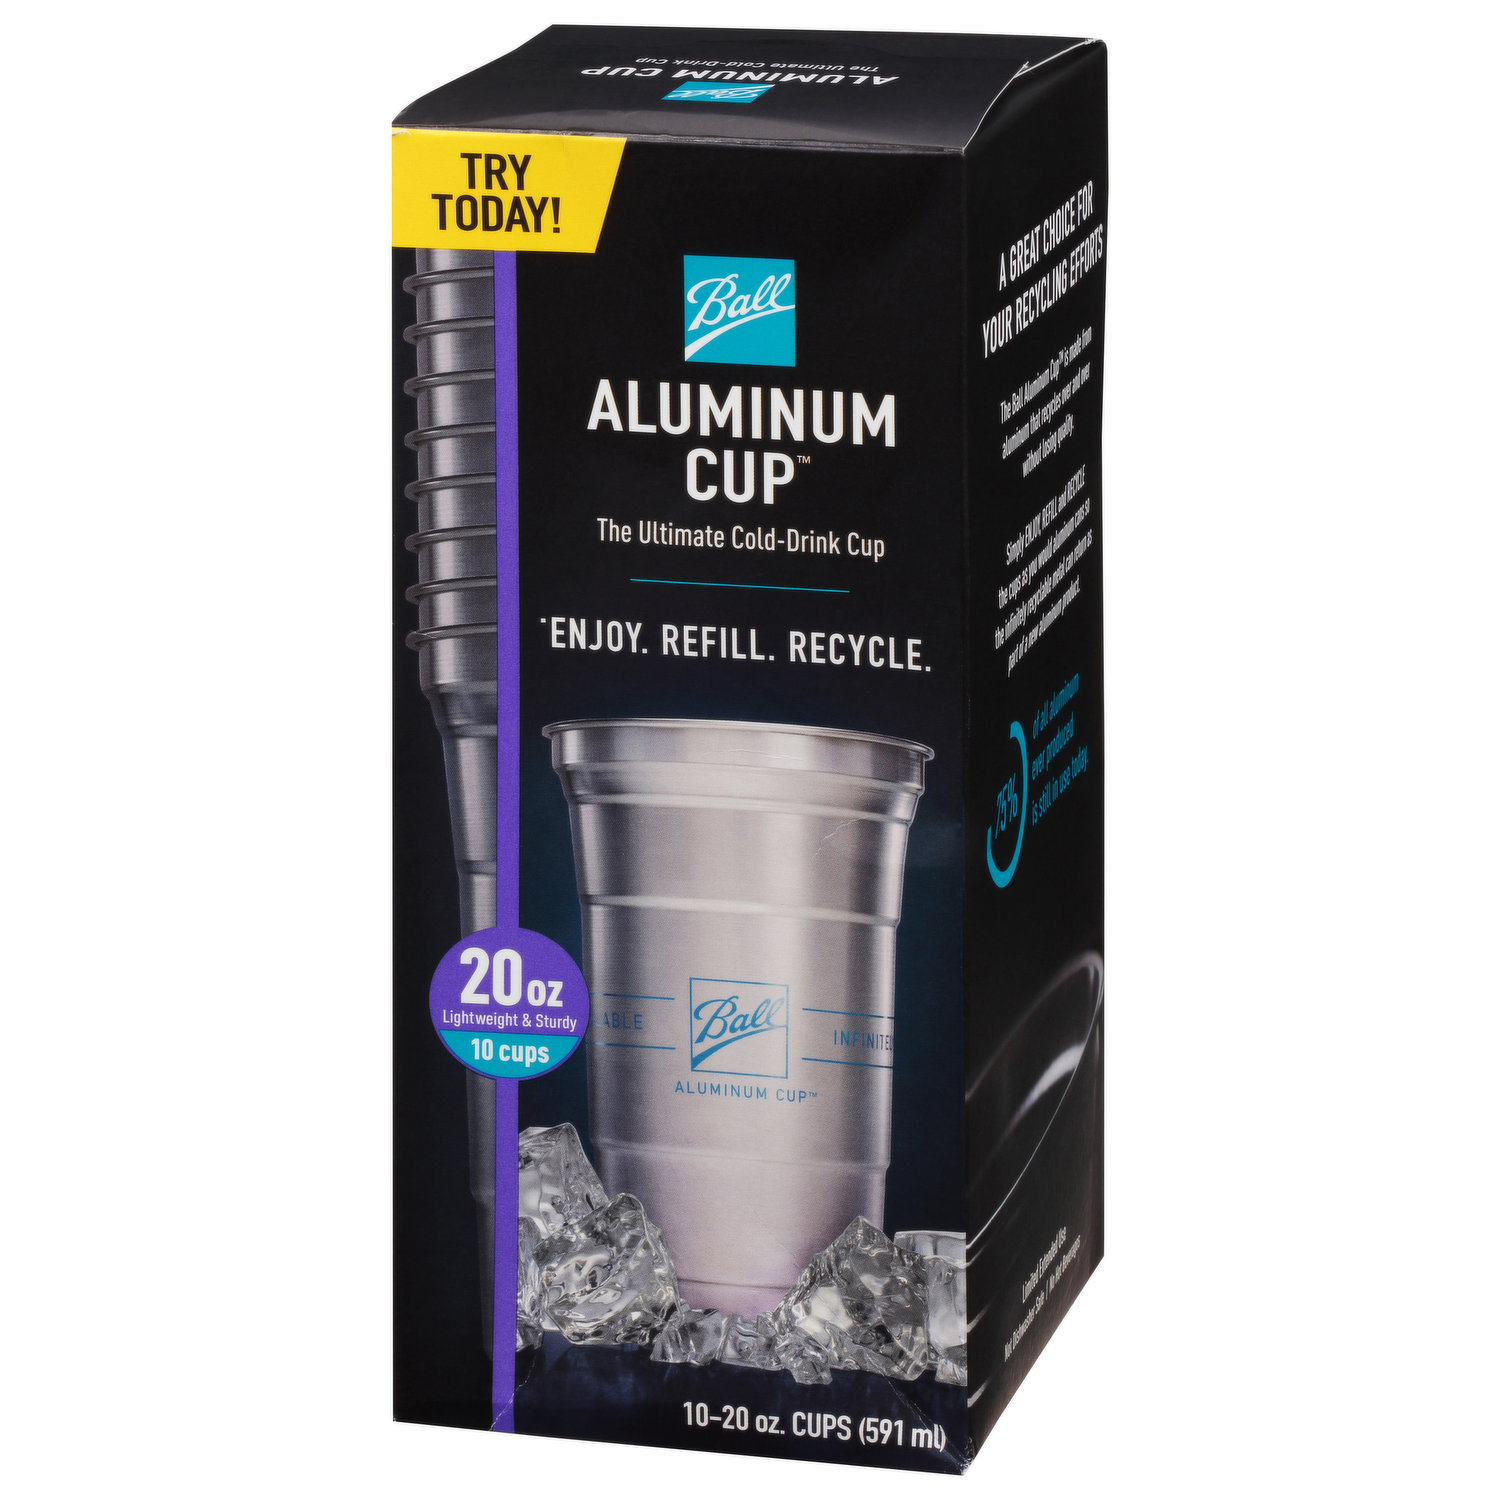 Ball Aluminum Cup, Disposable Recyclable Cold-Drink Cups, 20 oz